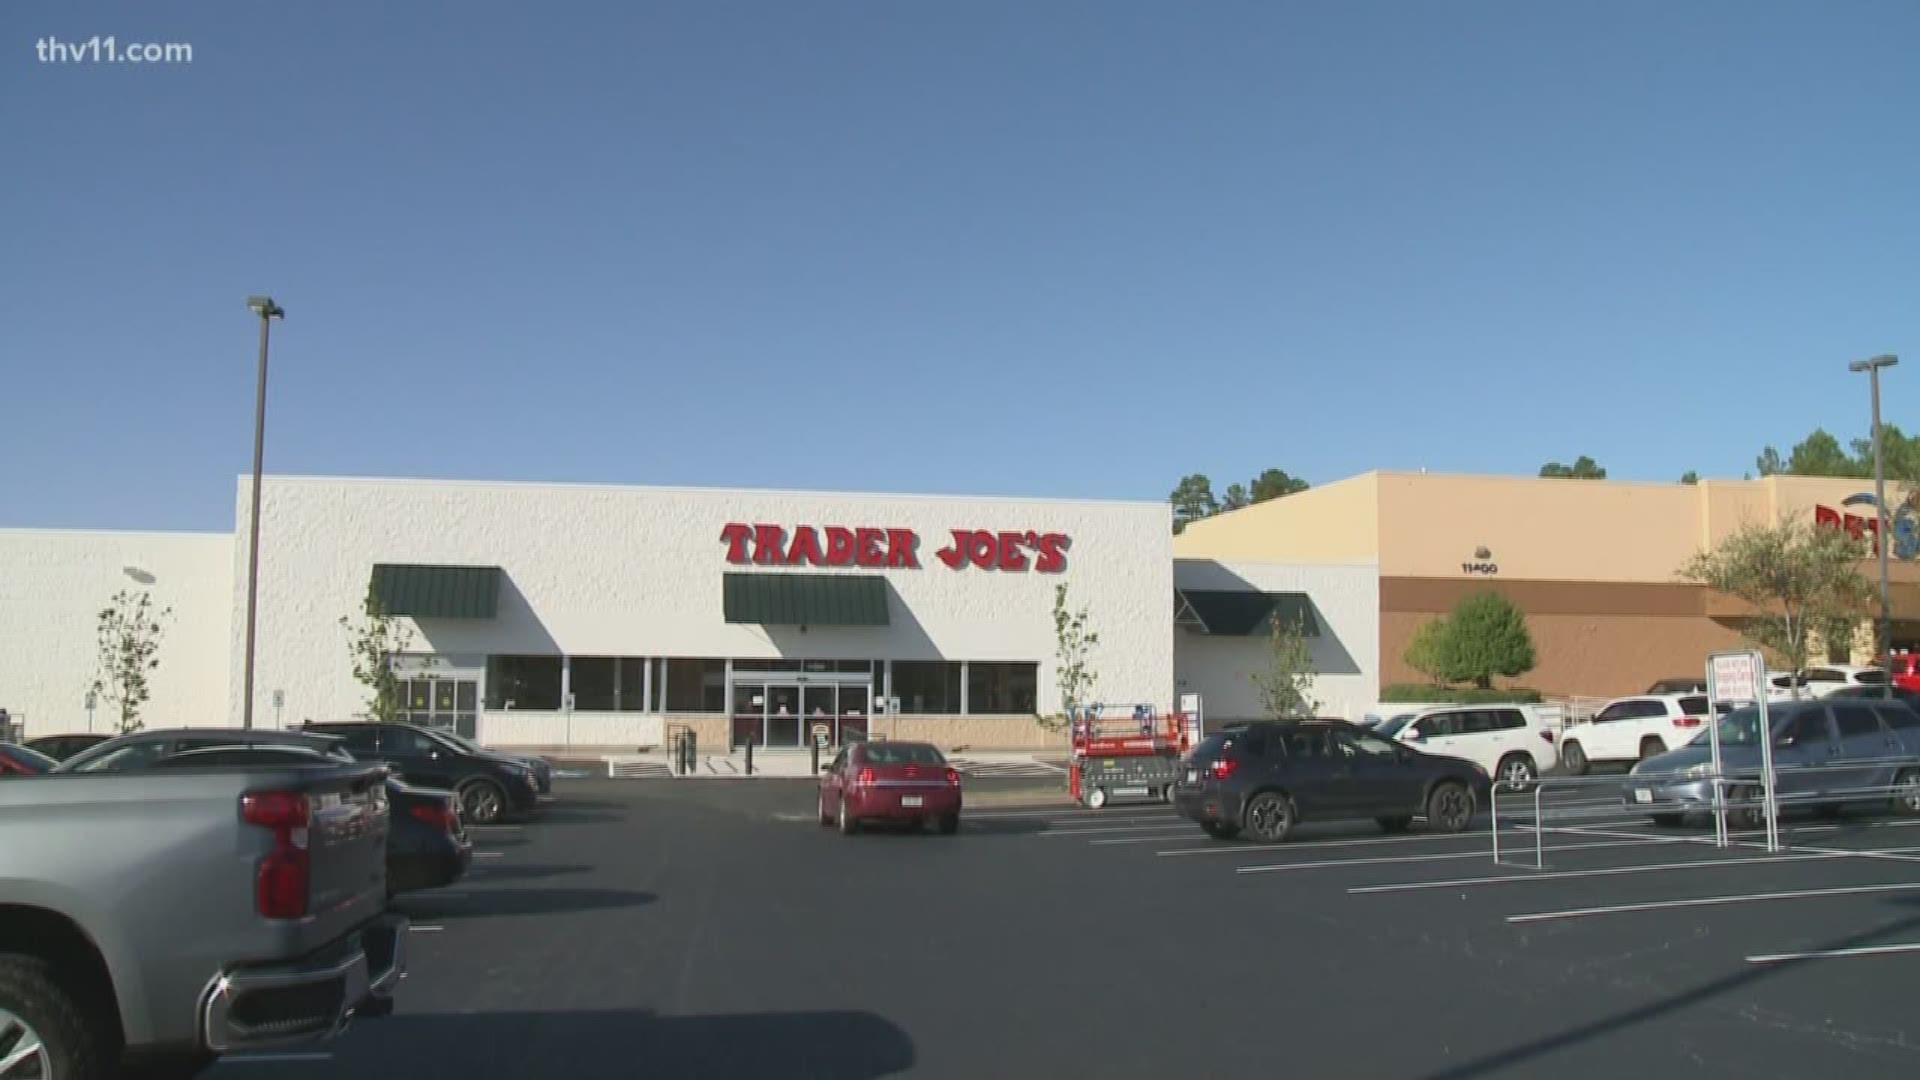 It's official! Trader Joe's will open in Little Rock on Tuesday, October 22.